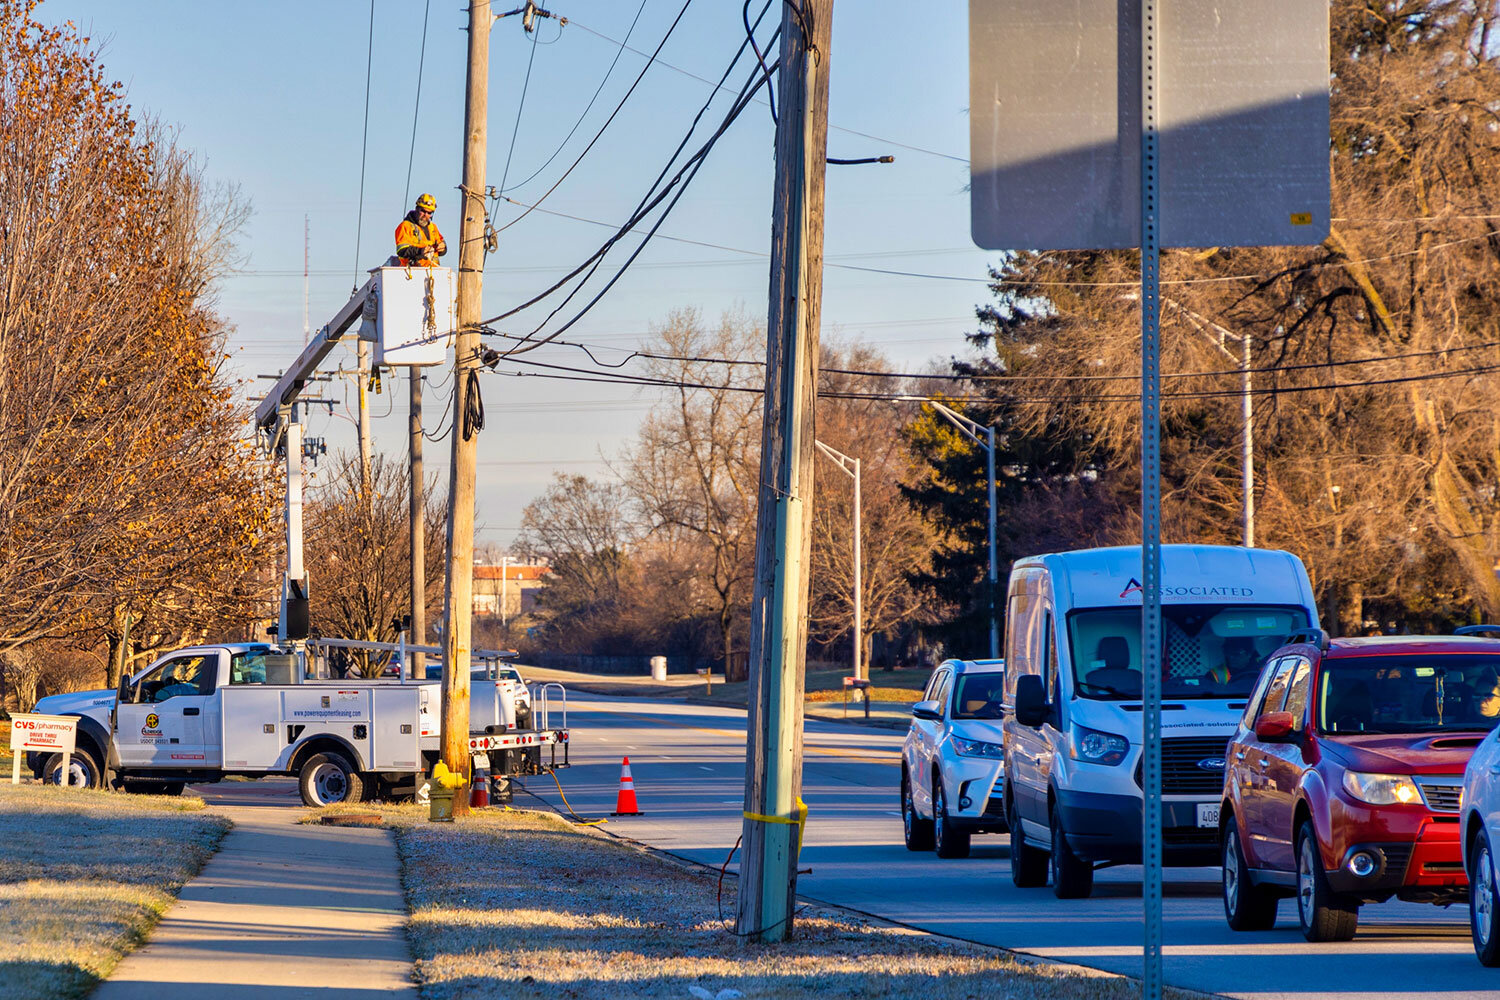 bucket-truck-safety-IIF-line=clearance-power-lines-electrical.jpg